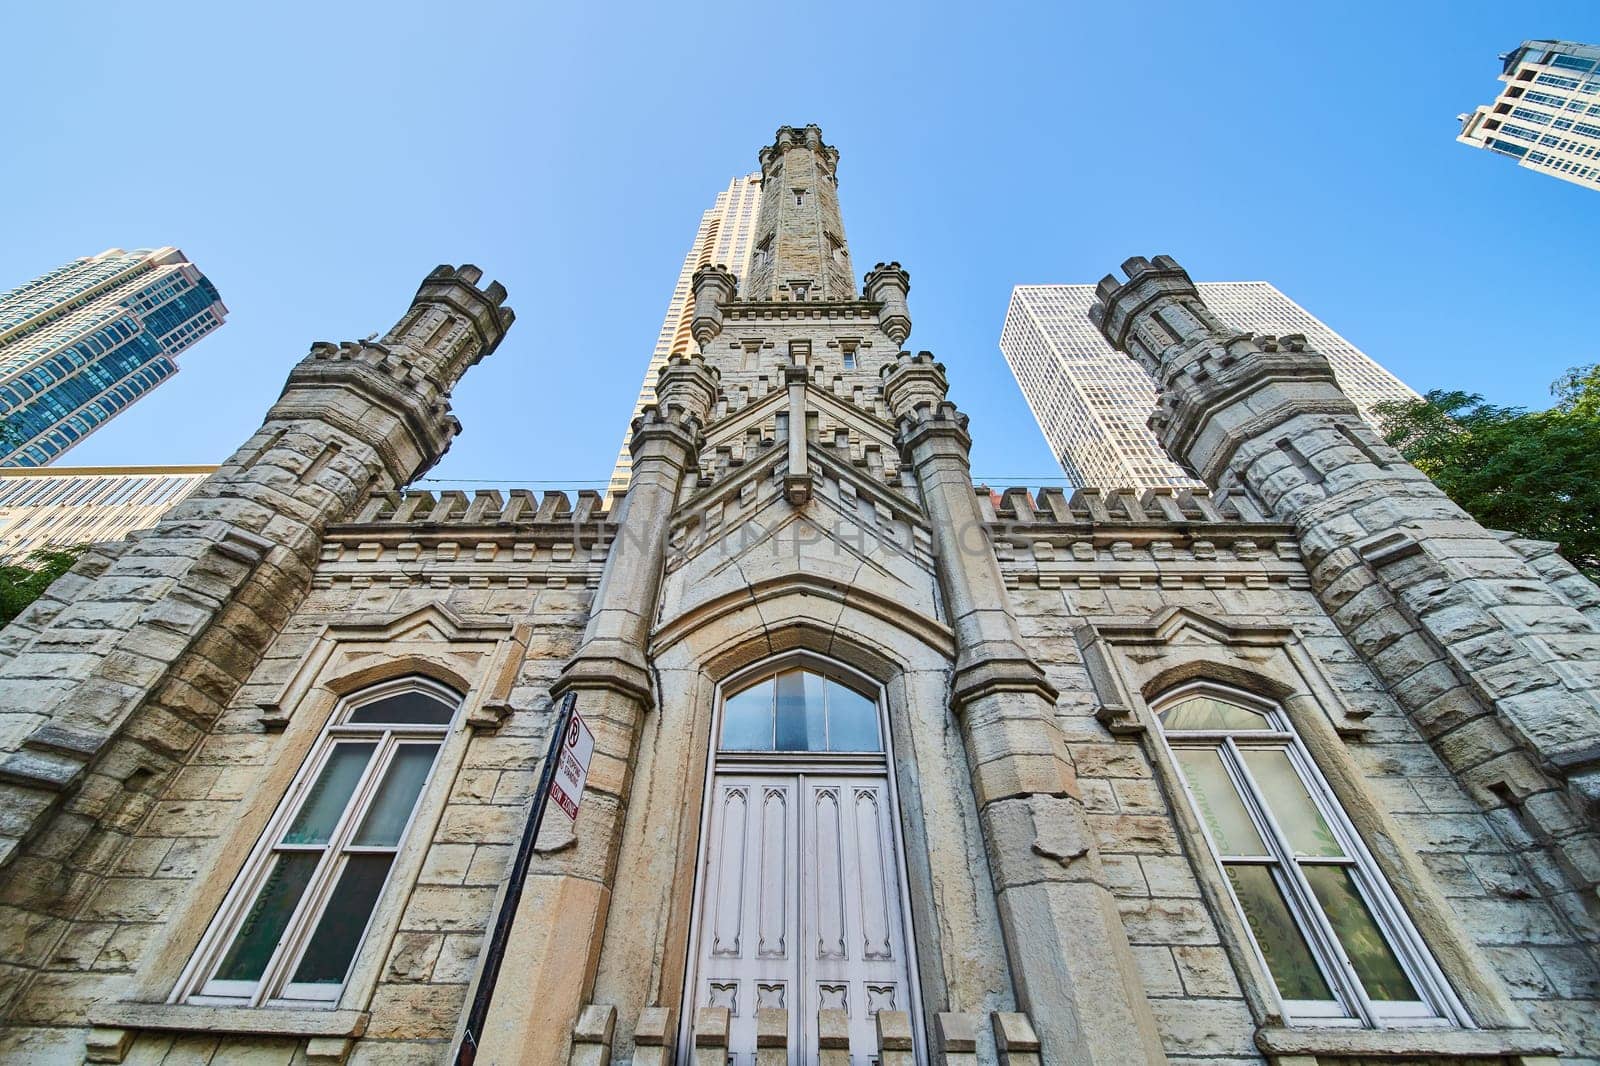 Image of Chicago historic water tower upward castle architecture view under blue sky, skyscrapers, tourism